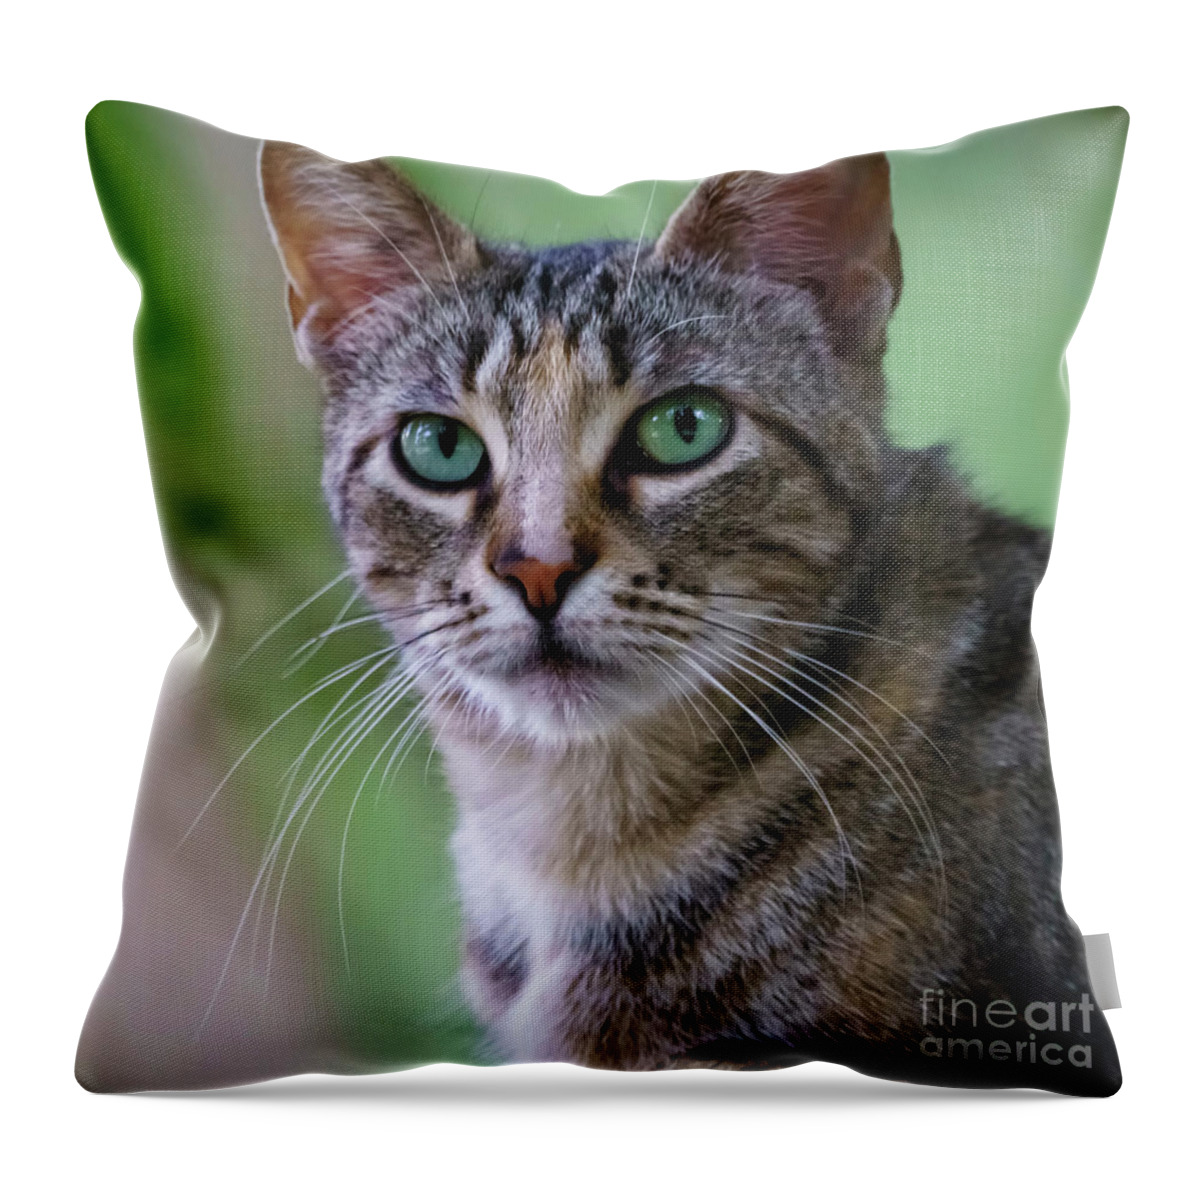 Grass Throw Pillow featuring the photograph Wild Cat Portrait Head On by Pablo Avanzini